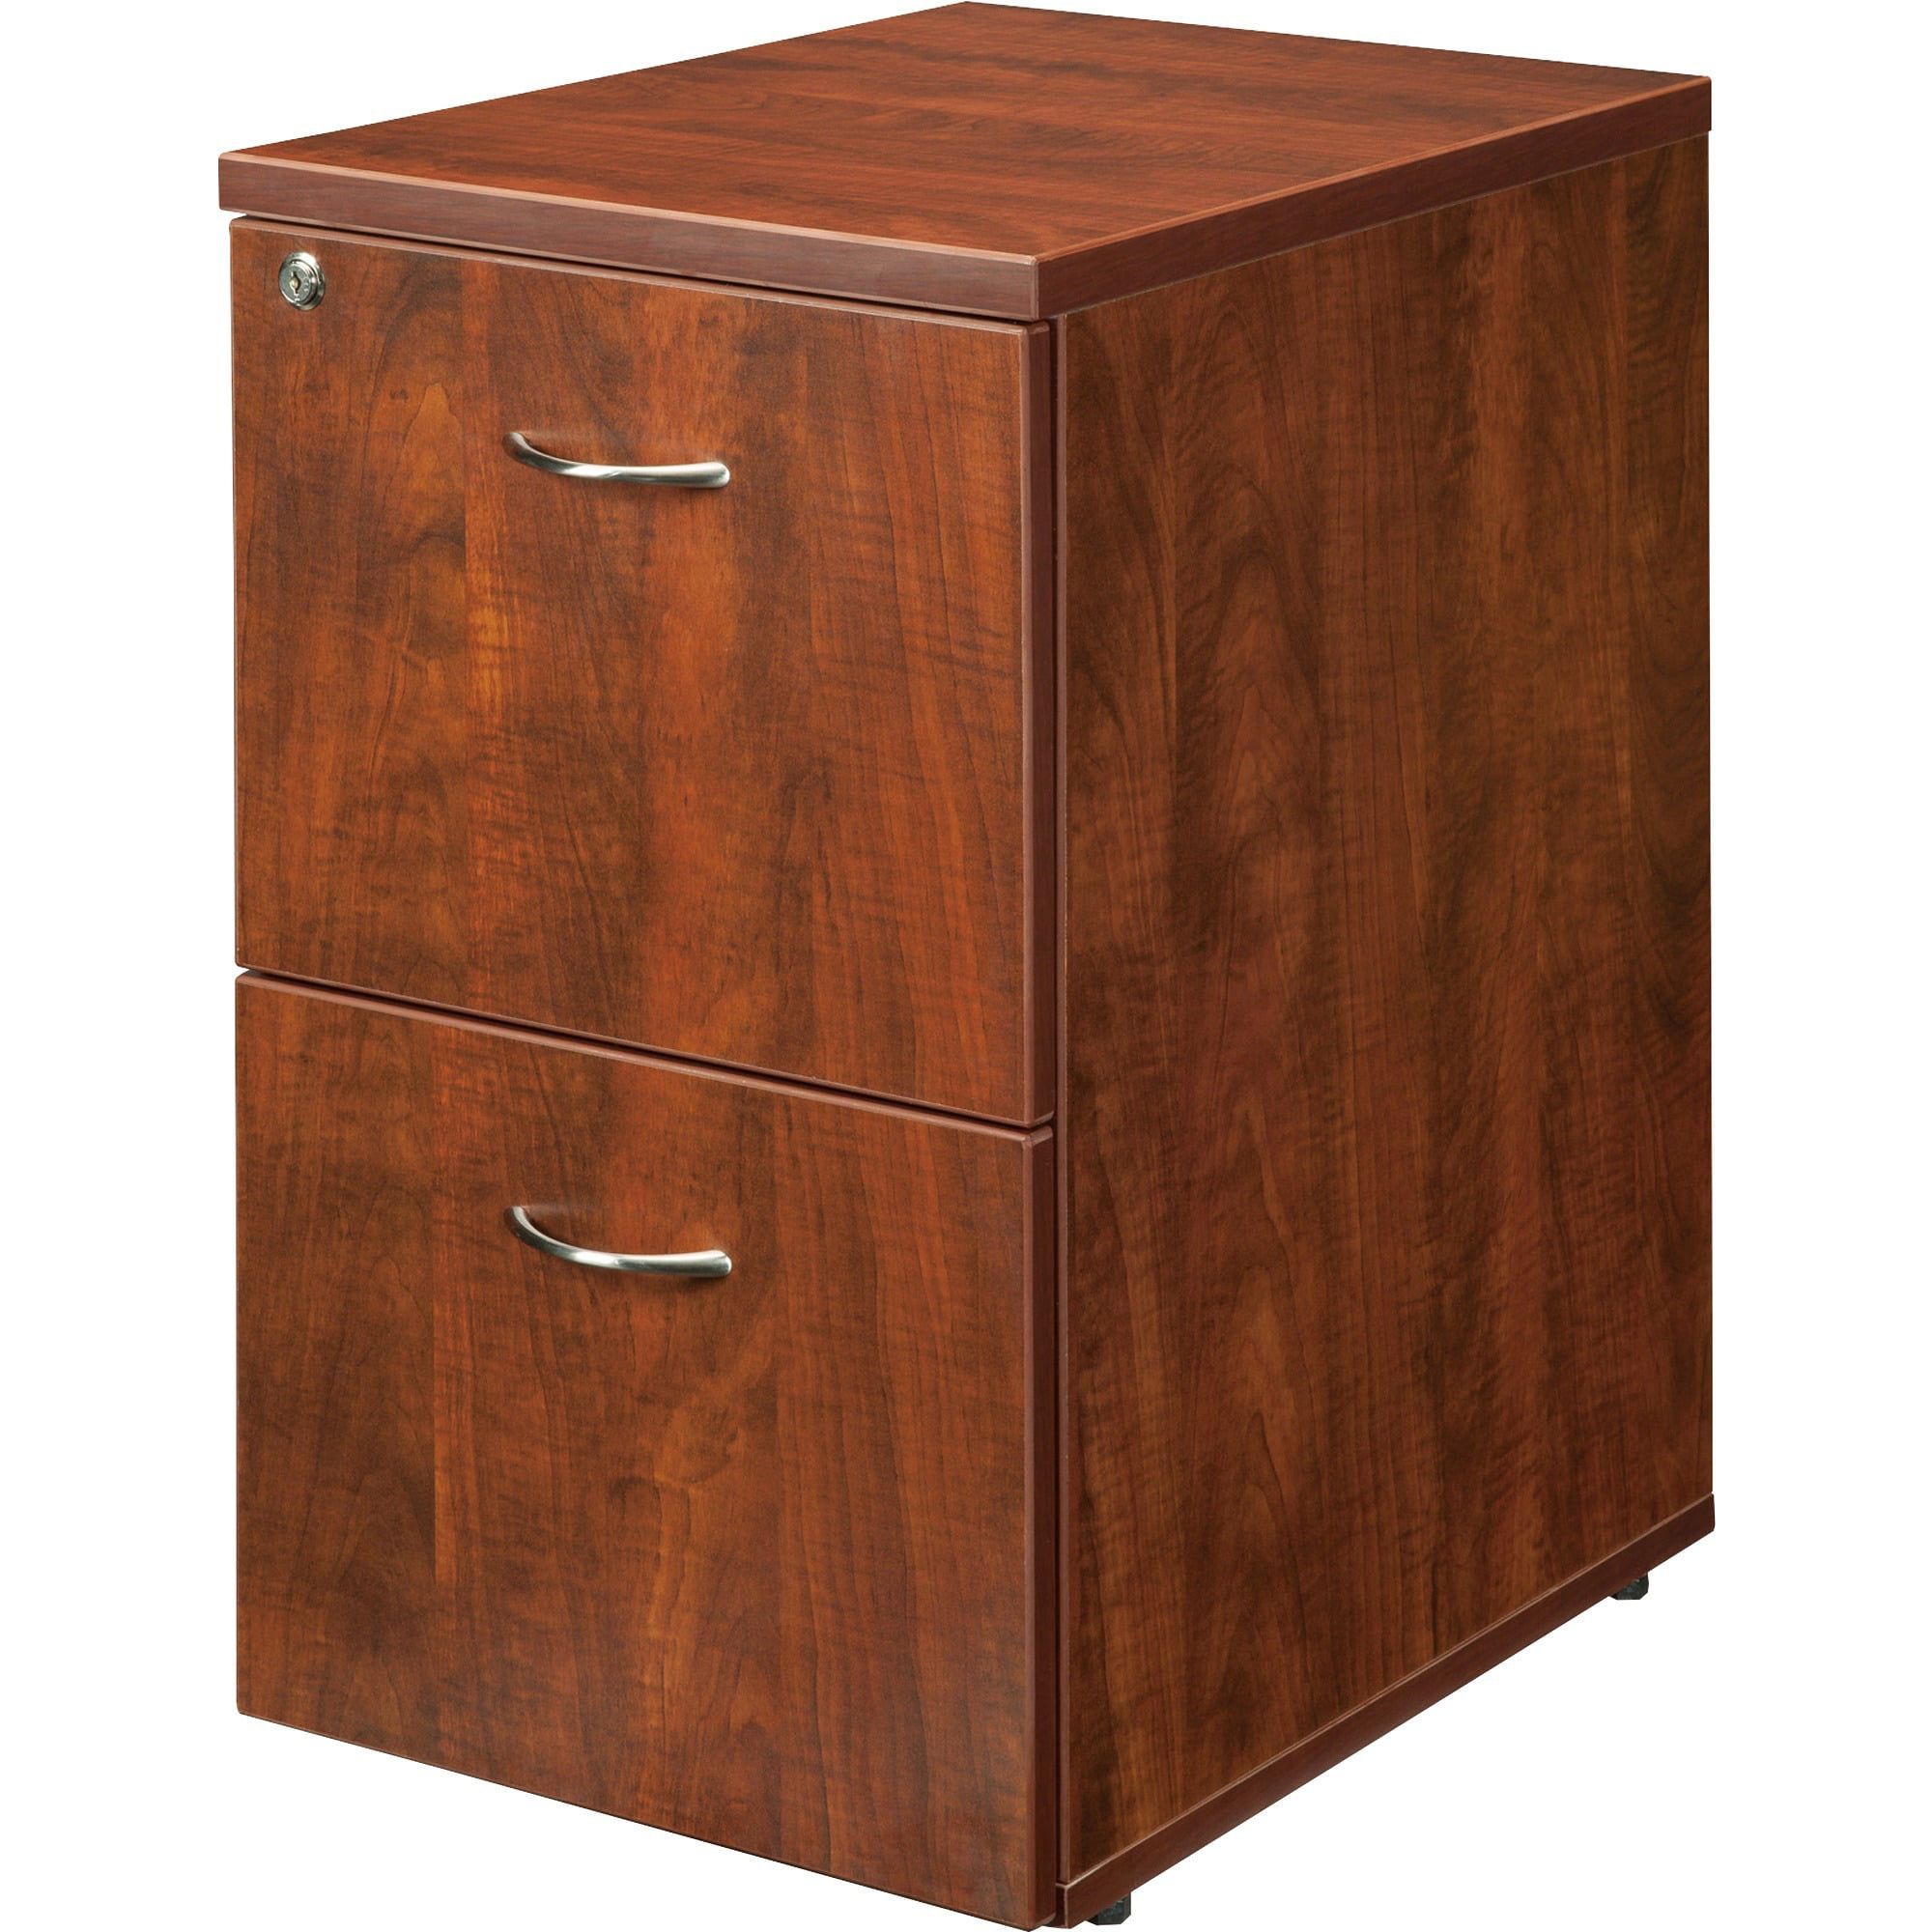 Trendy 2 Drawers Vertical Wood Composite Lockable Filing Cabinet, Cherry Pertaining To Wood Cabinet With Drawers (View 3 of 15)